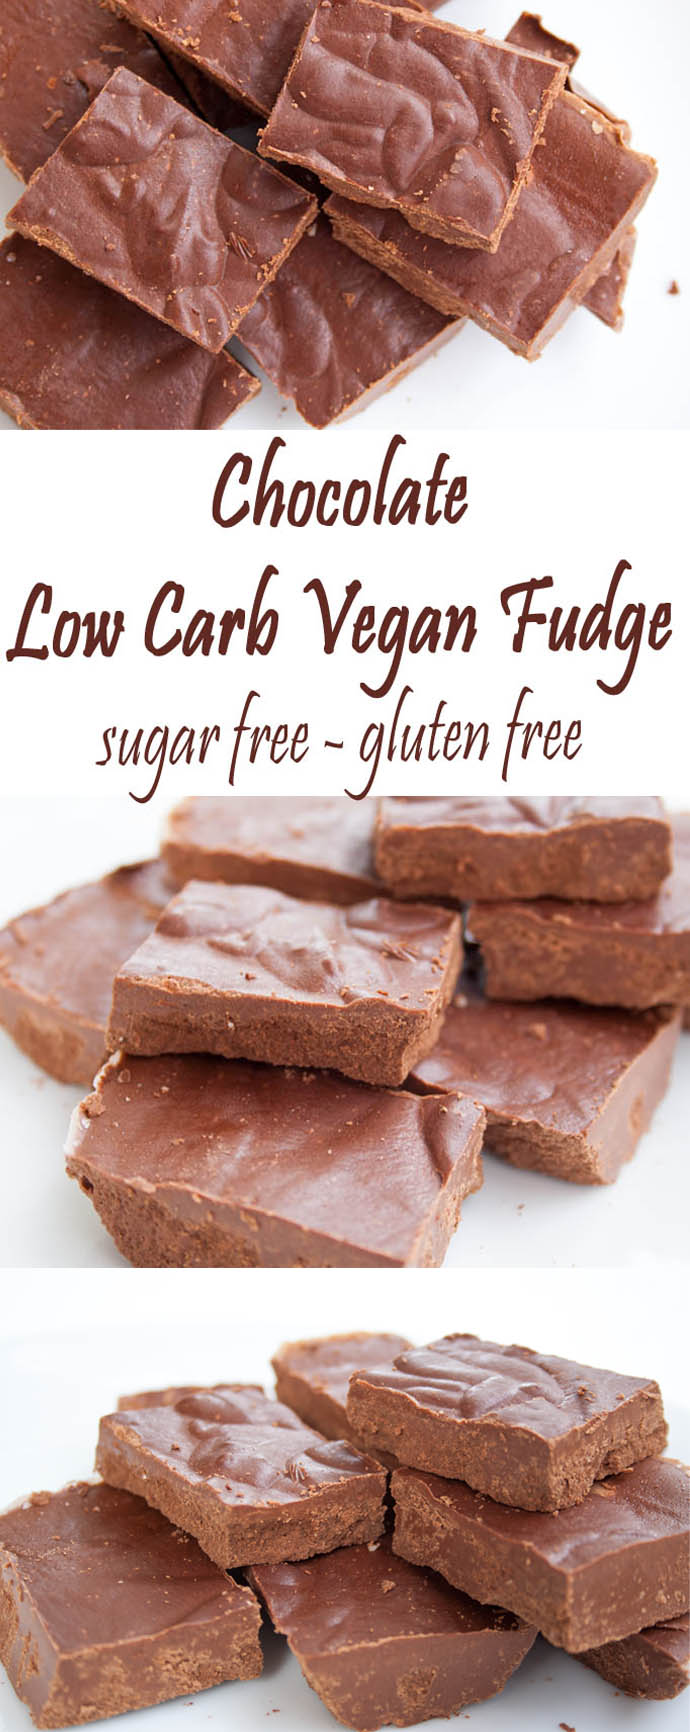 Chocolate Low Carb Vegan Fudge collage photo with text.